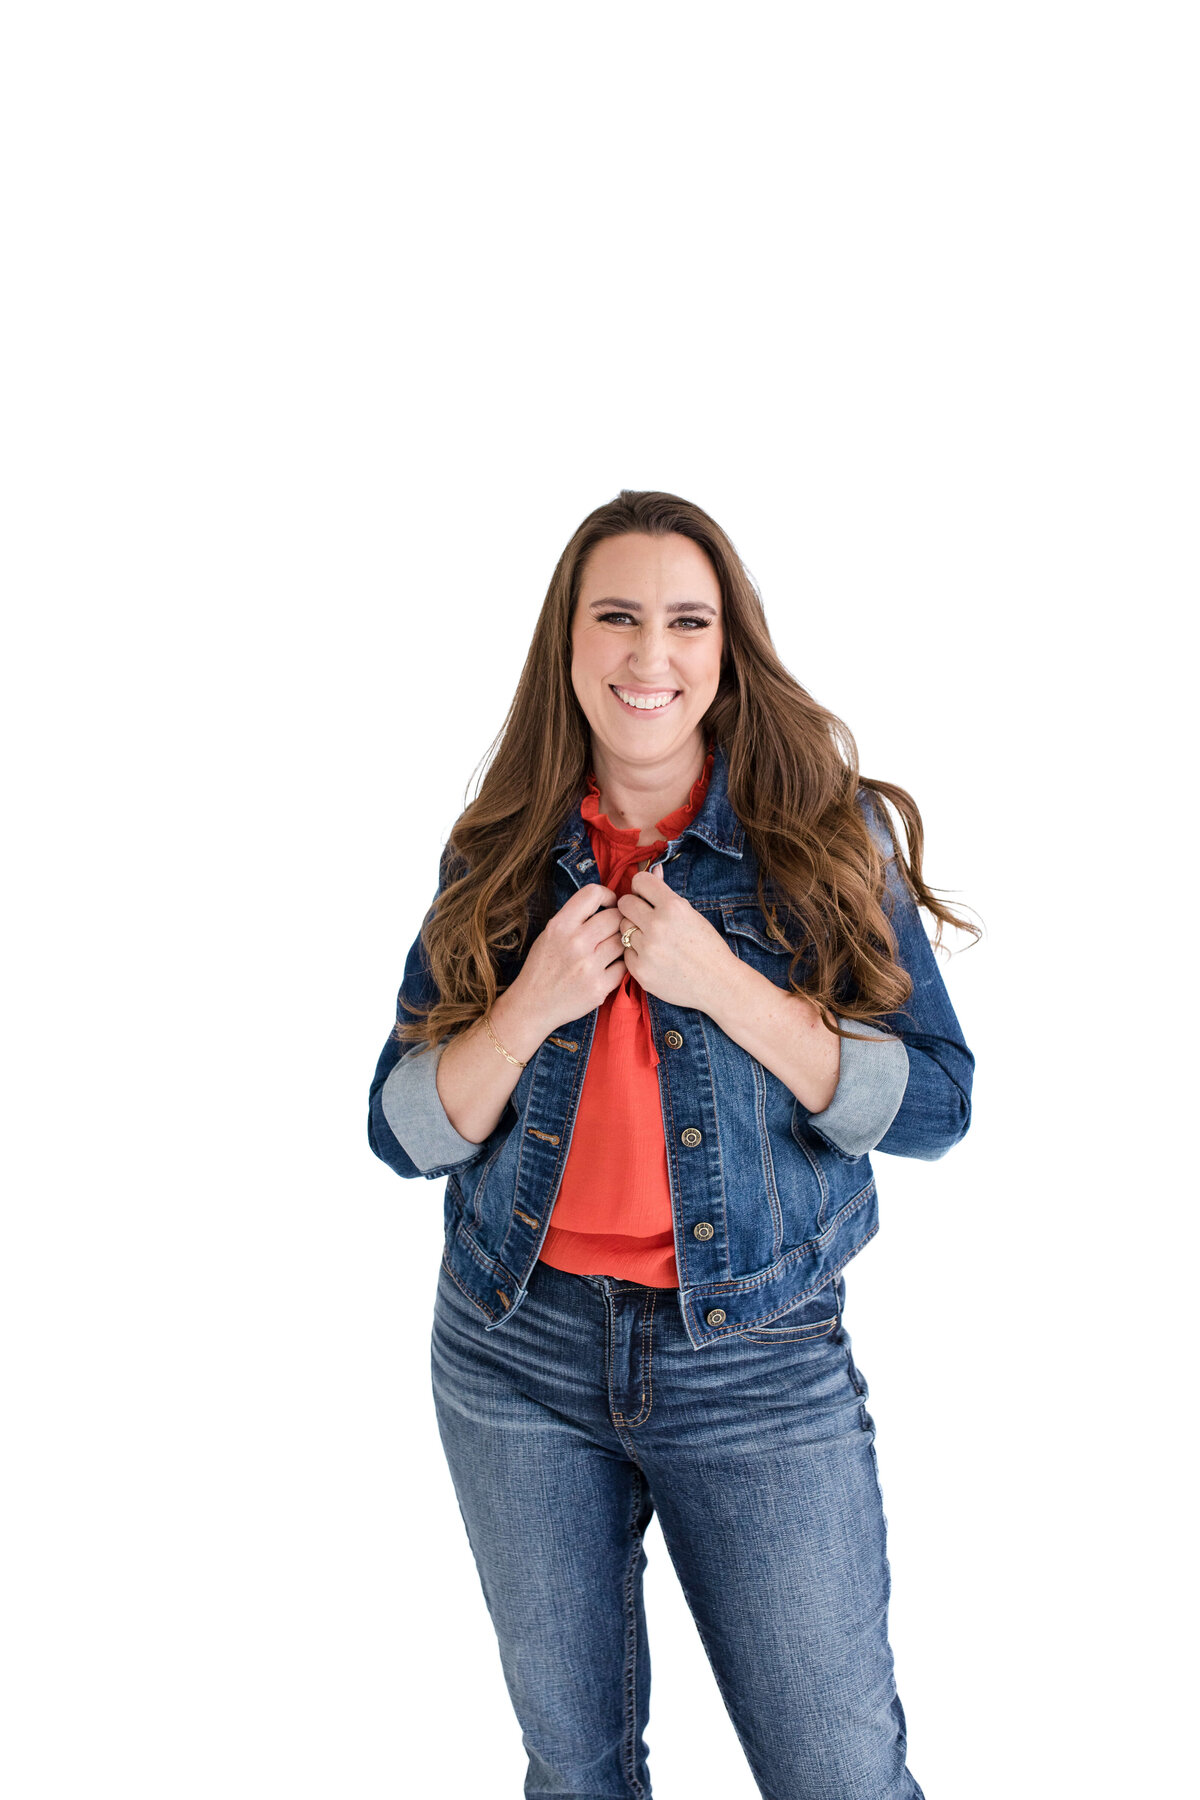 brand photographer near me captures brand photo of woman in a red blouse and denim jacket on a white background holding her jacket and smiling